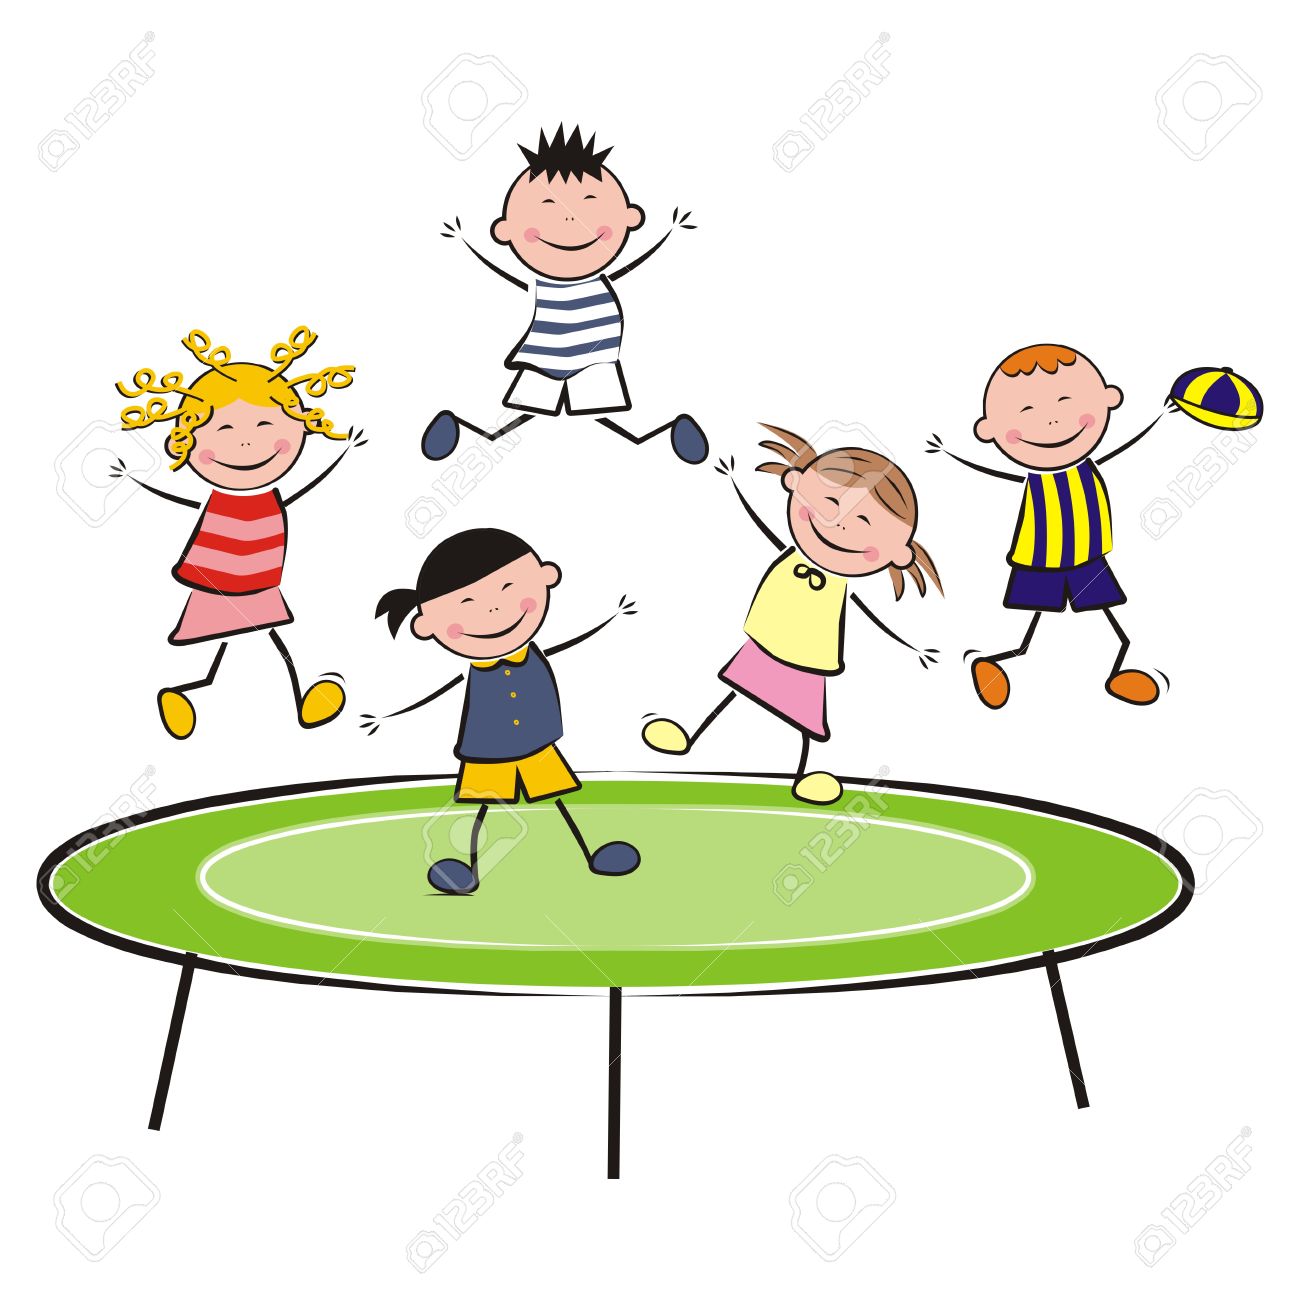 Jumping clipart. Kids station 